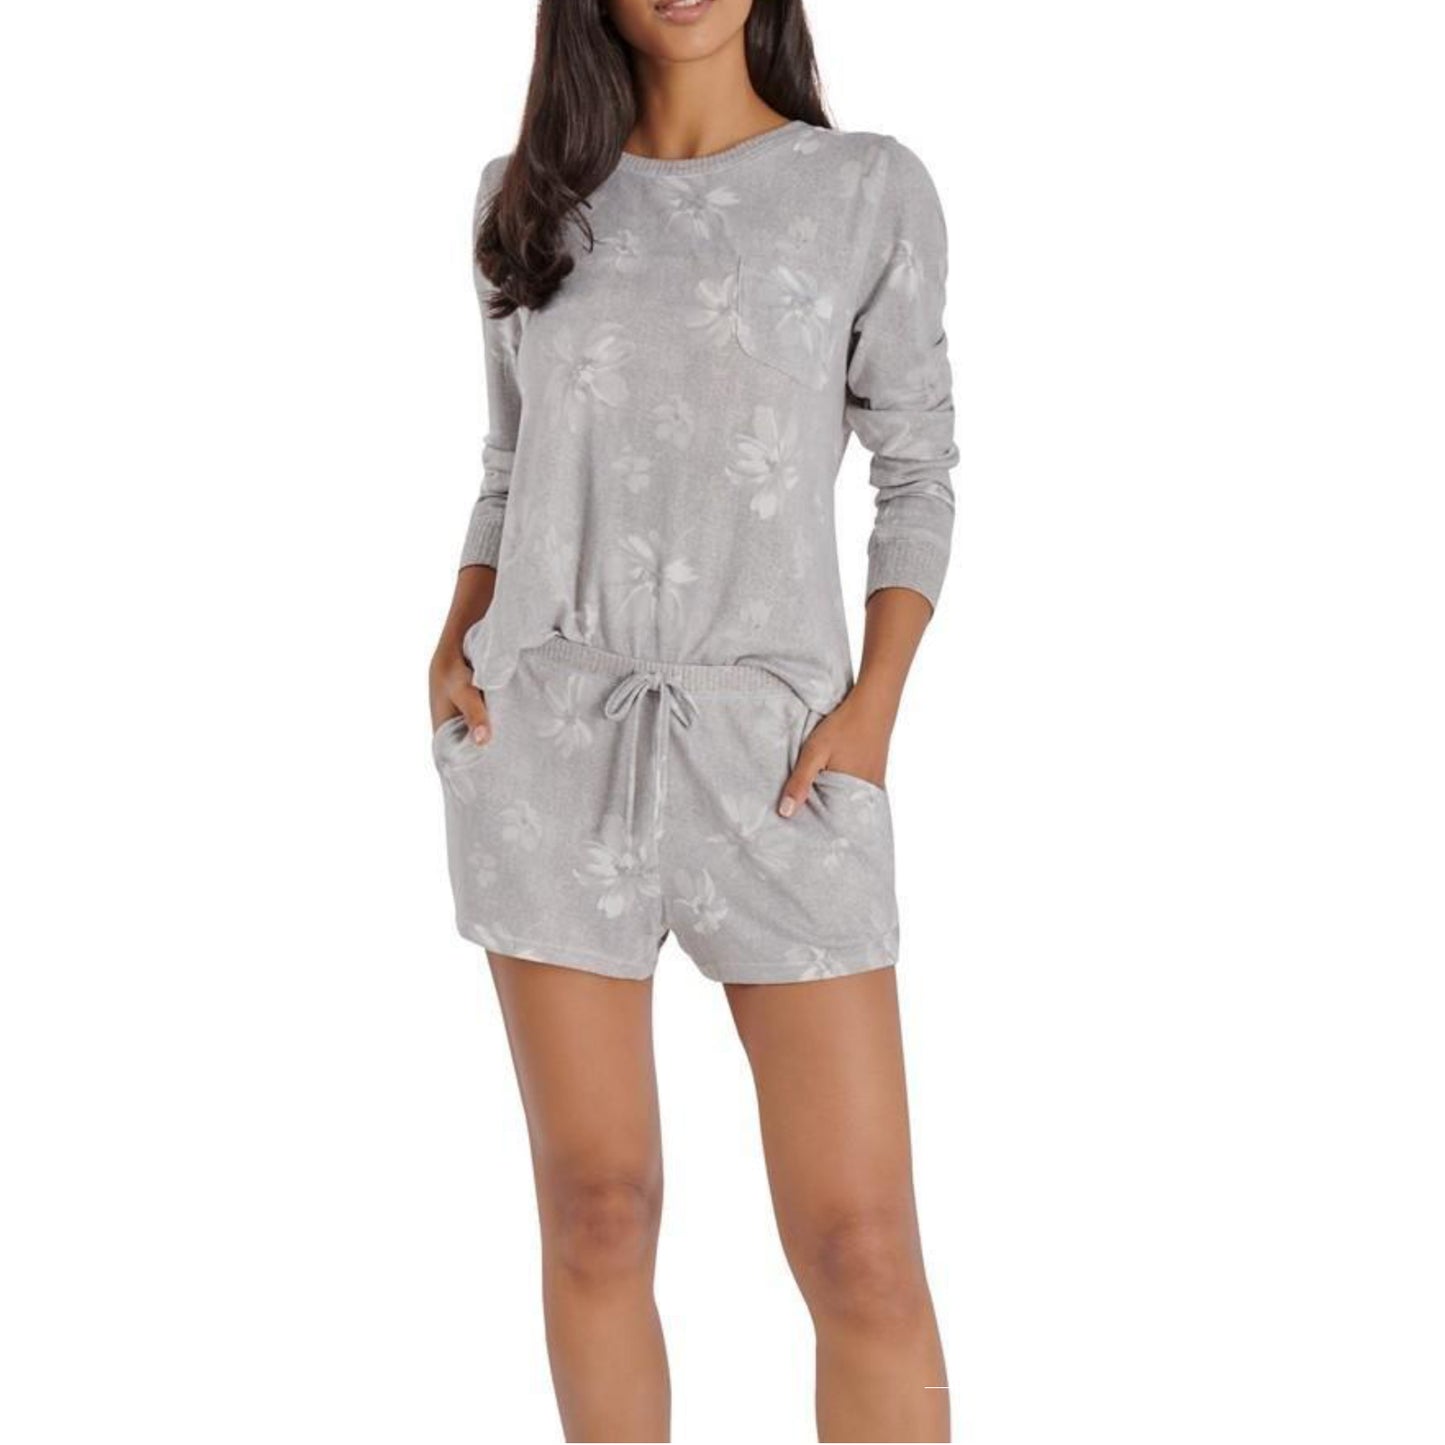 LAURA ASHLEY Women's Ultra Soft 2 Piece Distressed Floral Print Top And Shorts Pajama Set